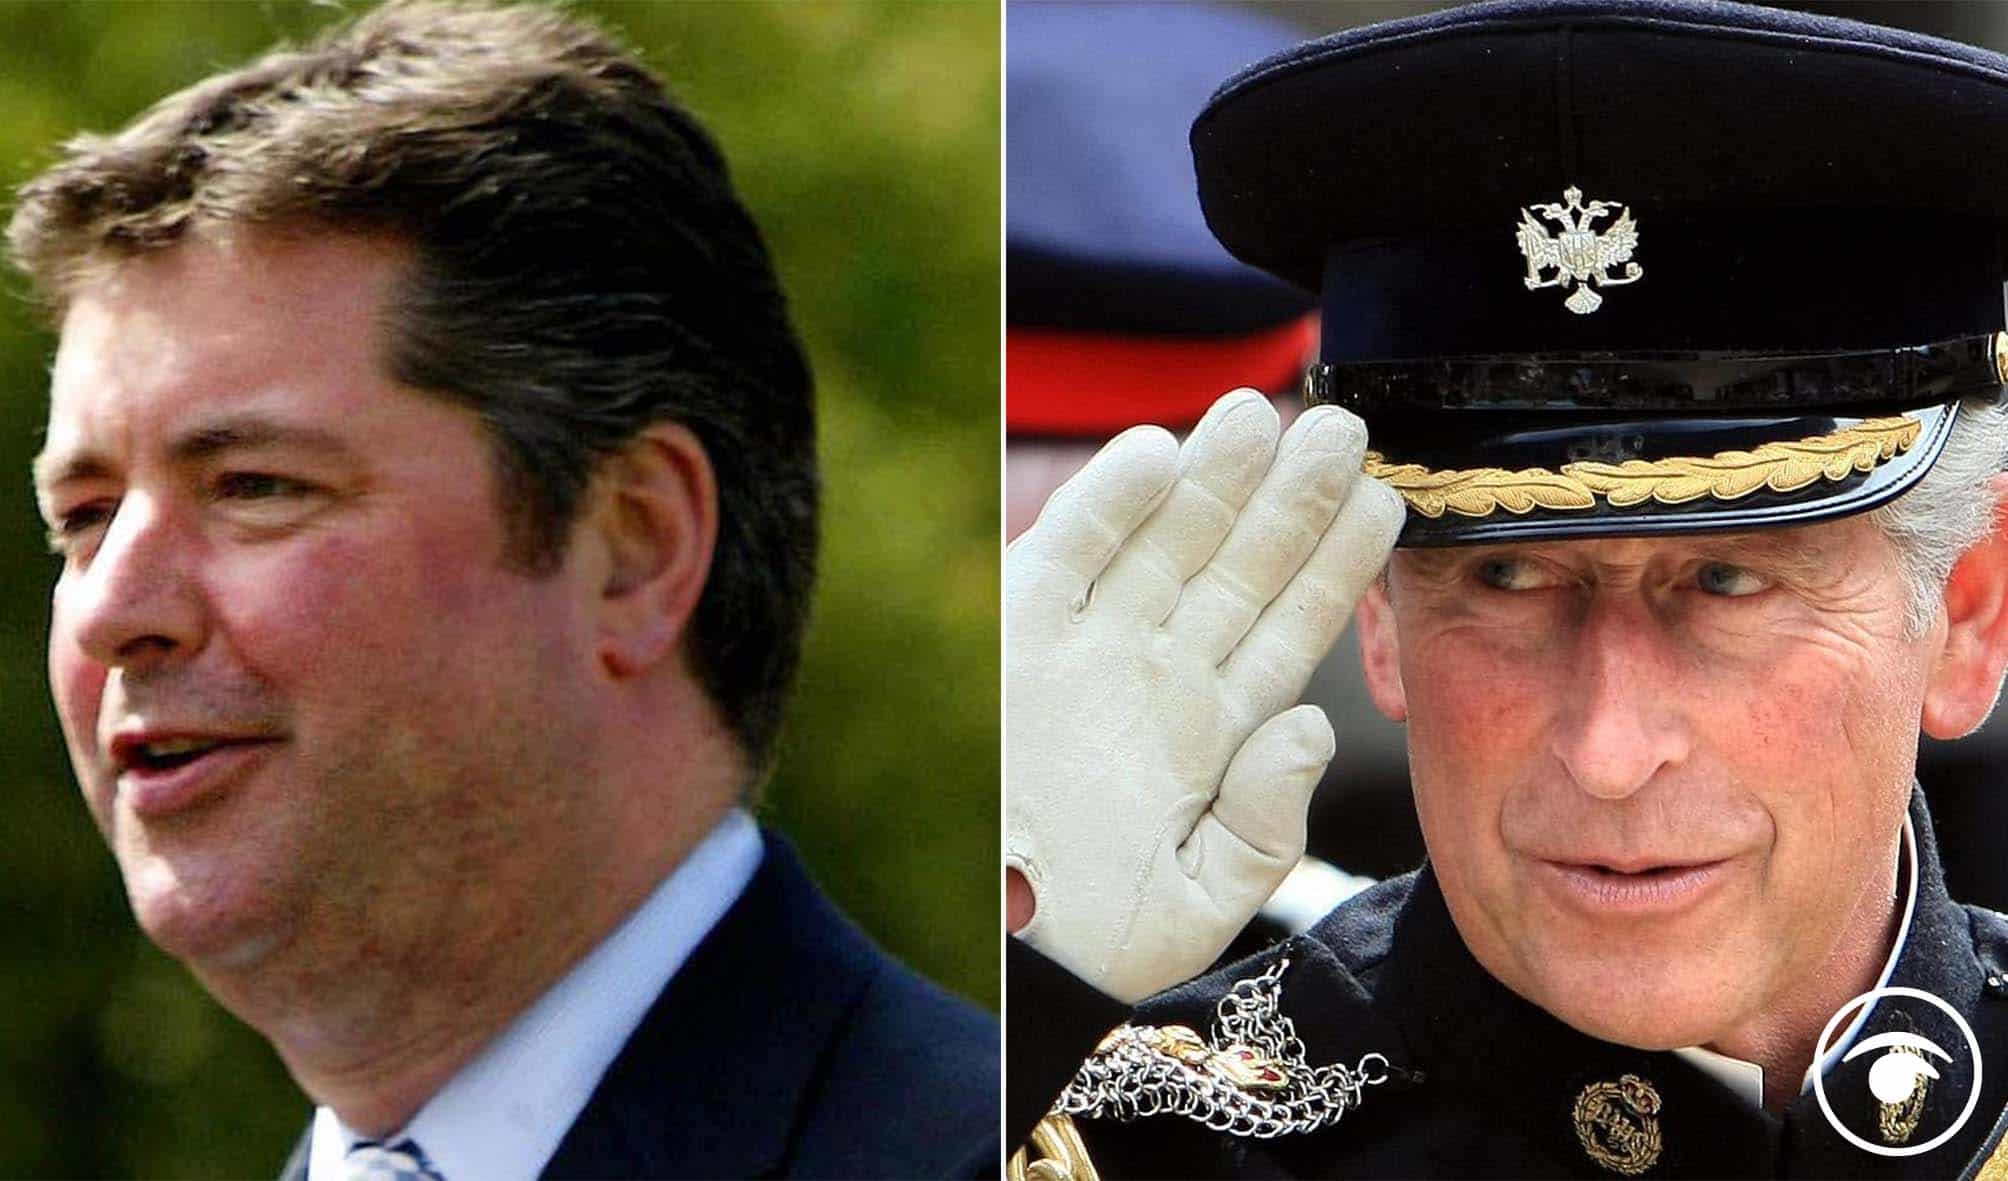 Prince Charles aide resigns amid probe into claims he helped Saudi tycoon donor secure CBE